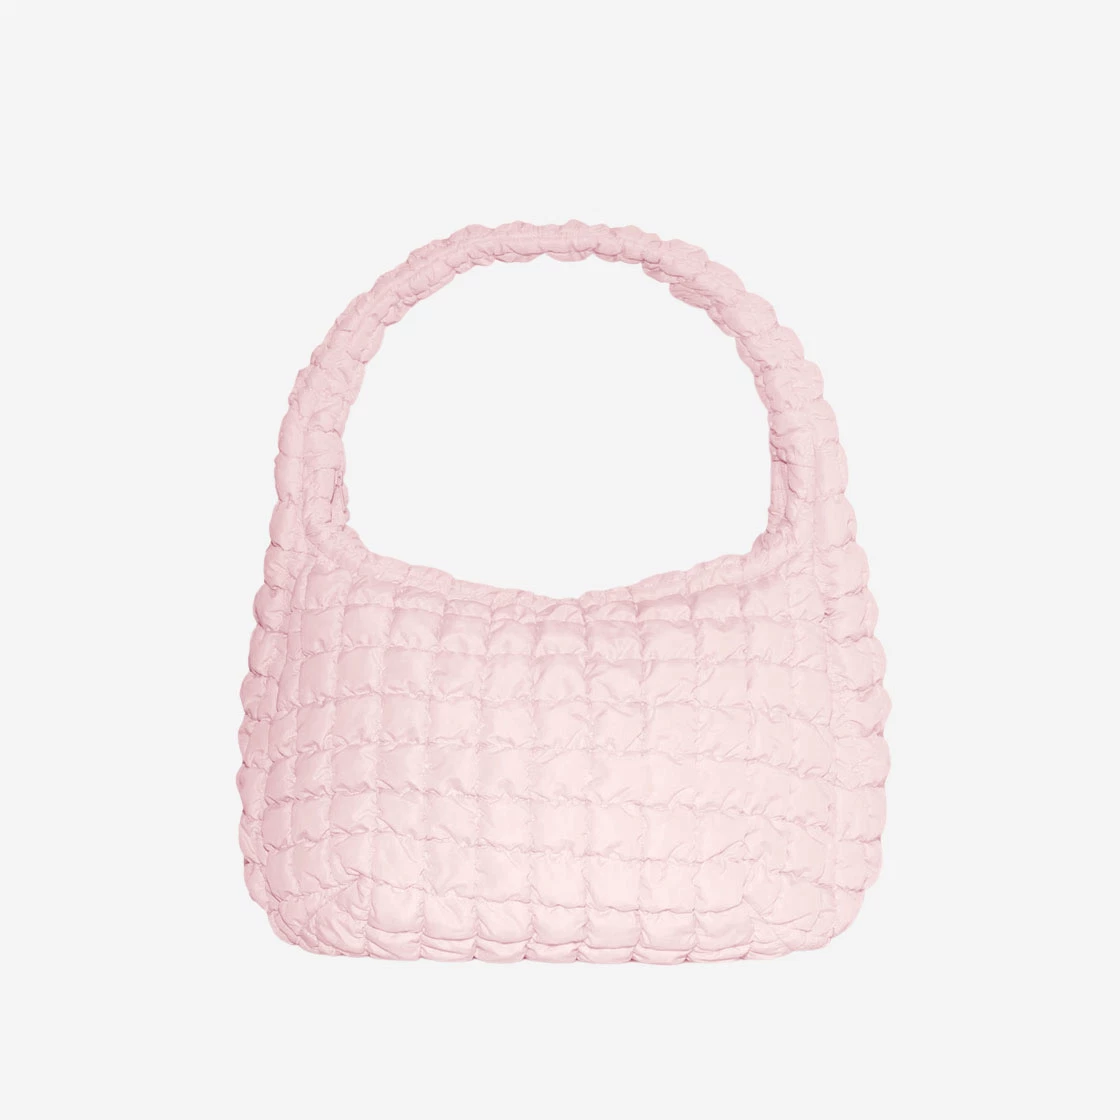 COS Quilted Oversized Shoulder Bag Pink 0916460020 / 100% Authentic